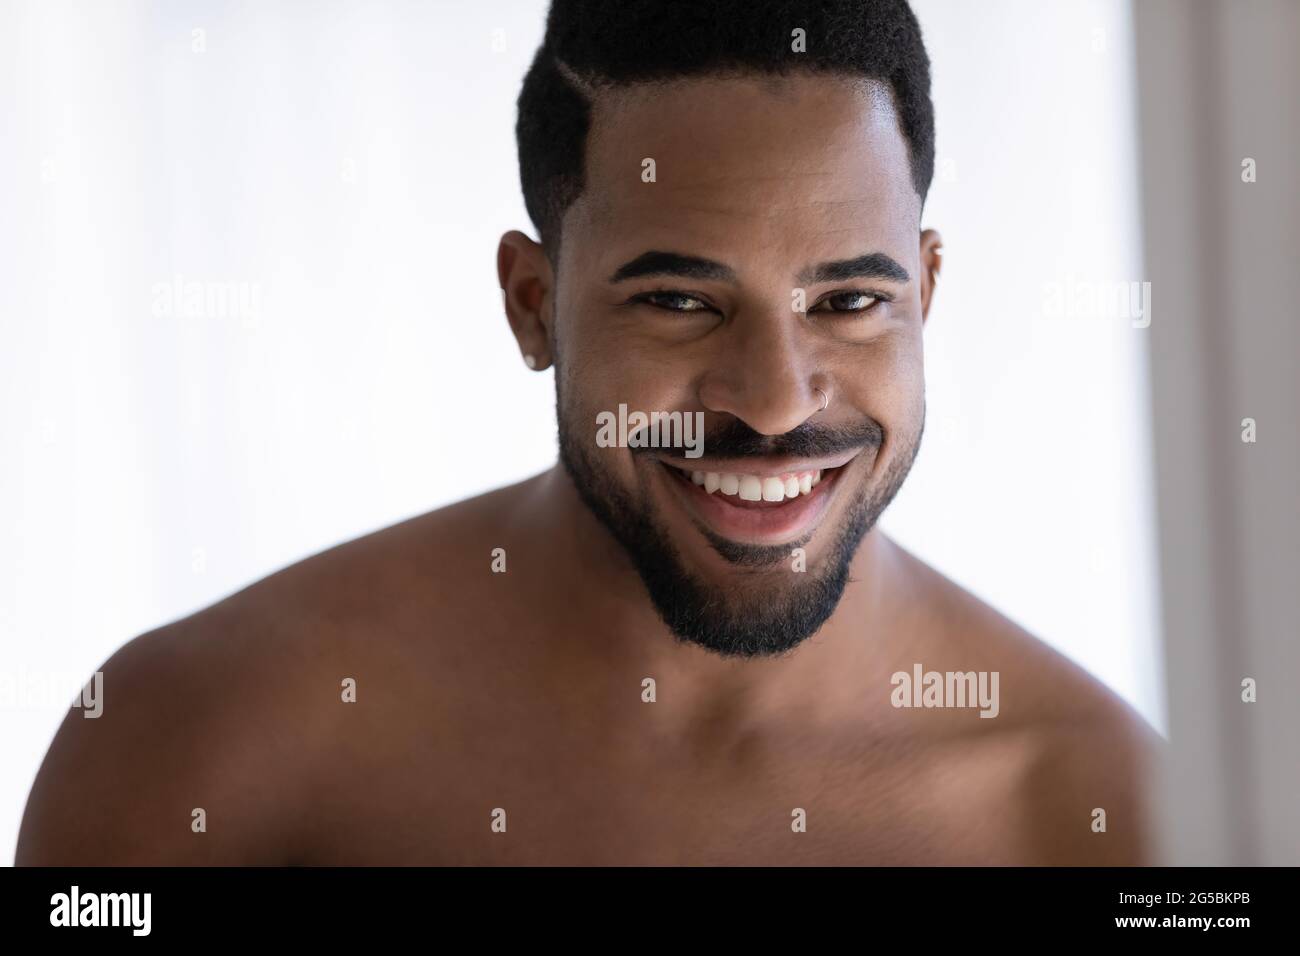 Close up portrait of attractive African American guy Stock Photo